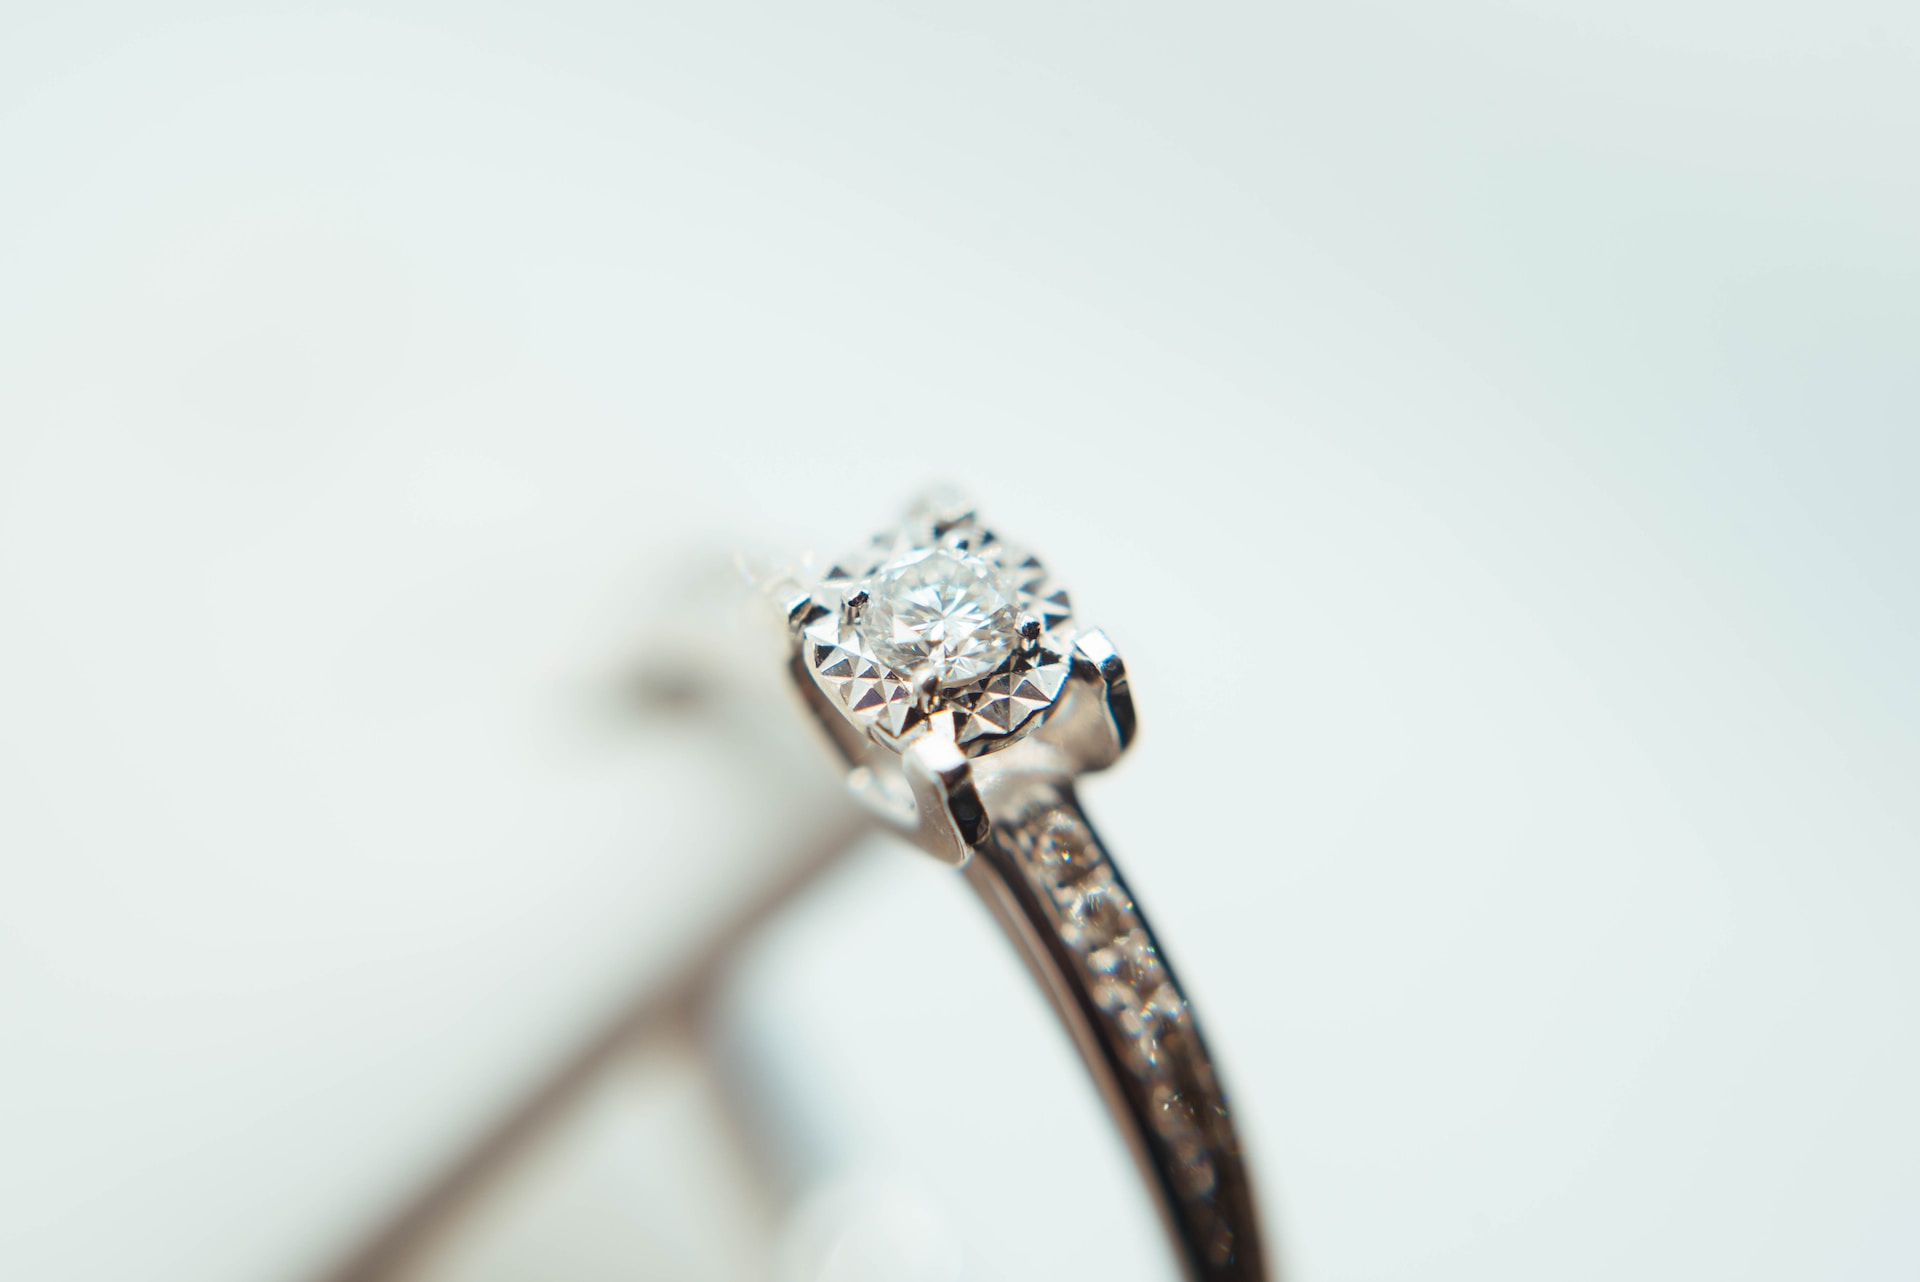 close up image of an engagement ring with a round cut center stone and channel set side stones